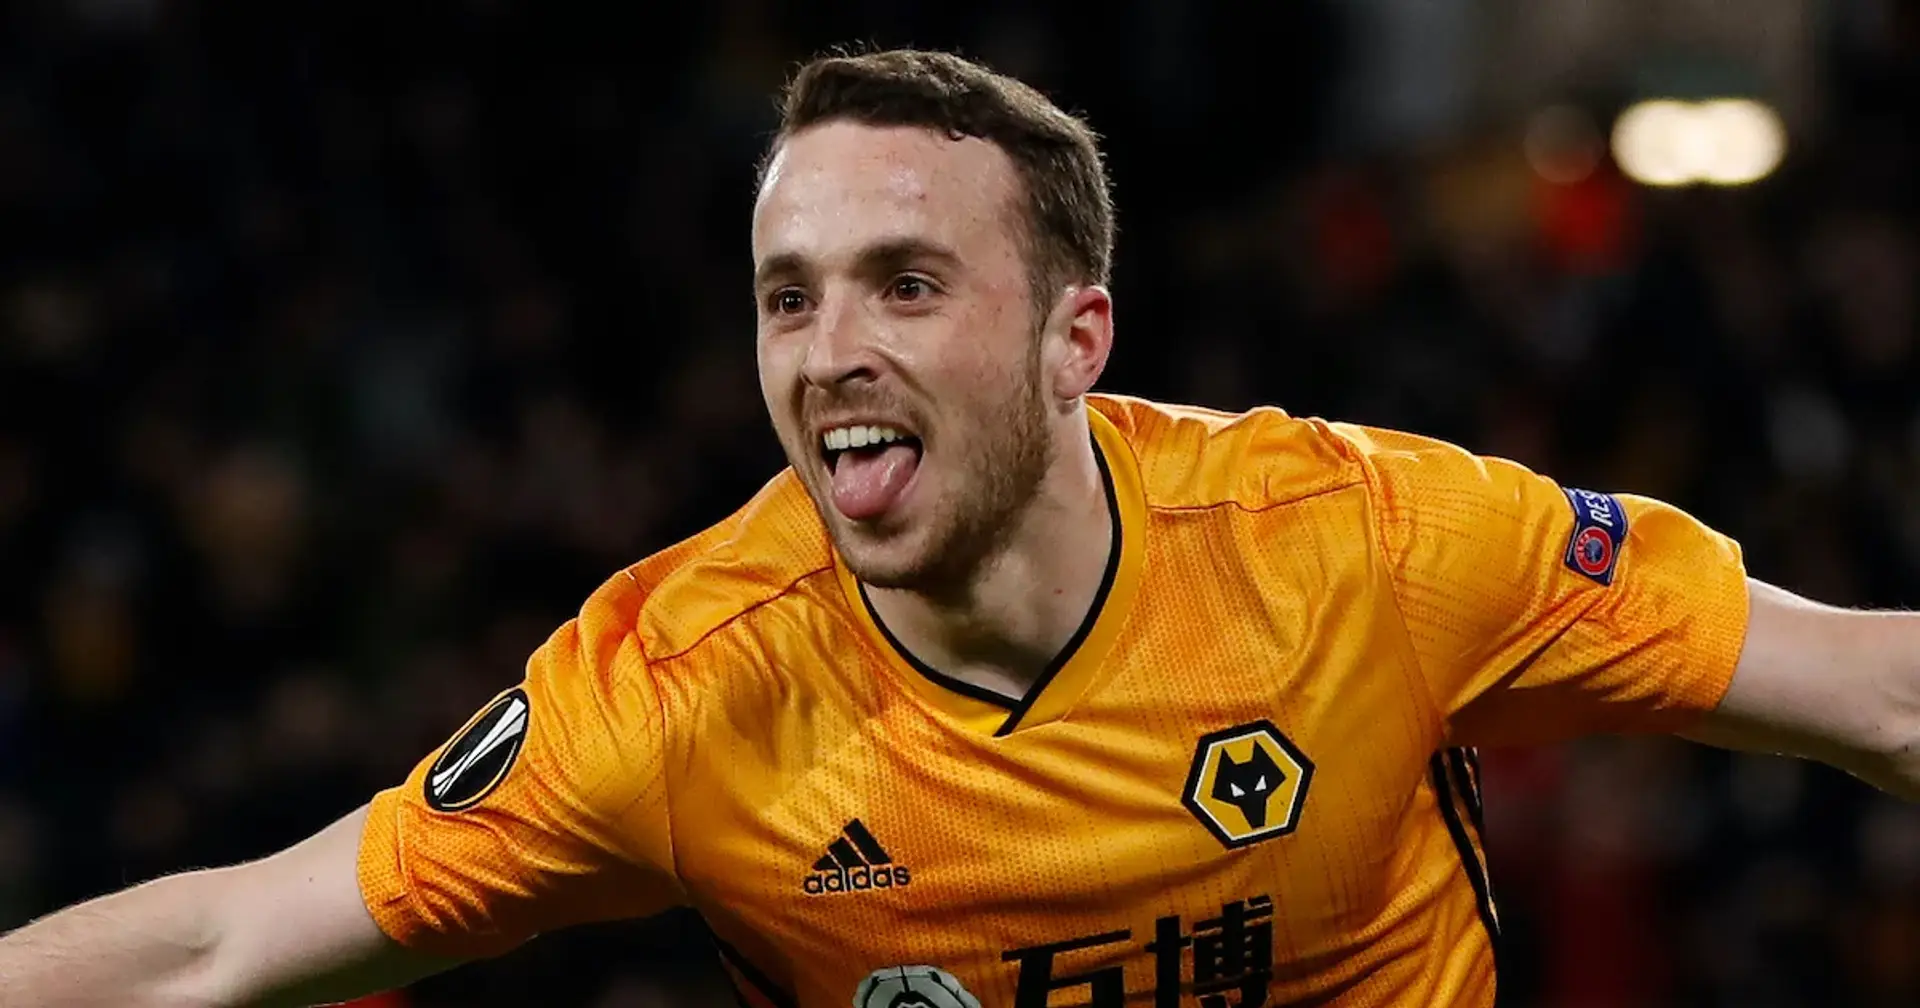 James Pearce: Liverpool sign Diogo Jota for £45m (reliability: 5 stars) 